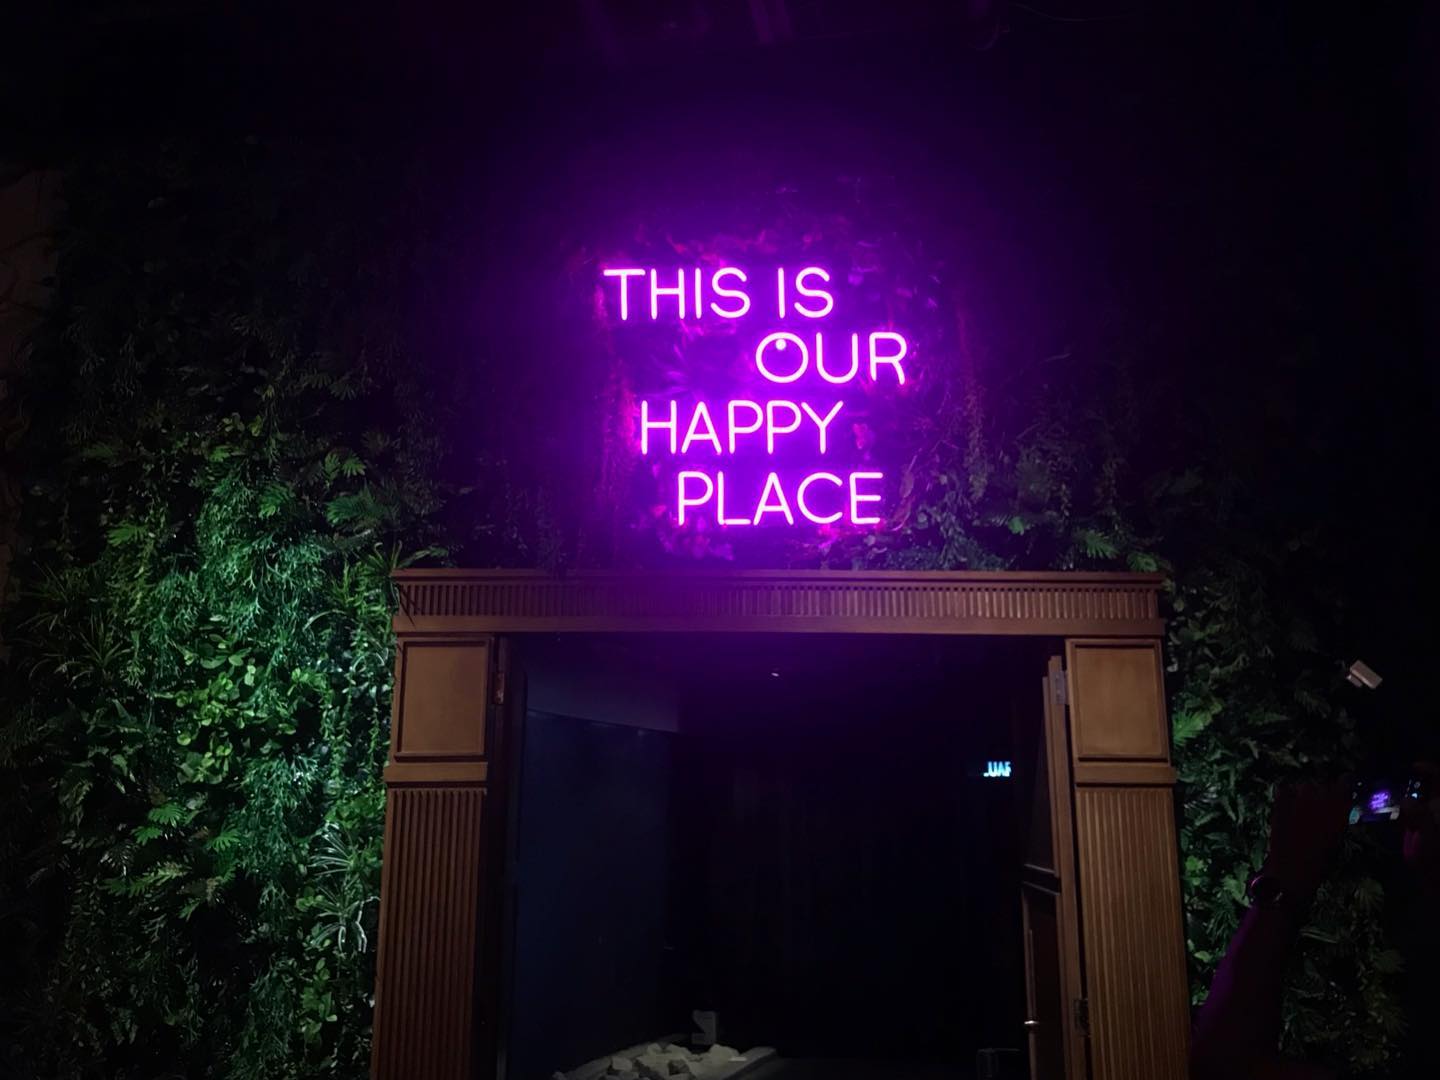 Looking for a amazing neon sign? ✨